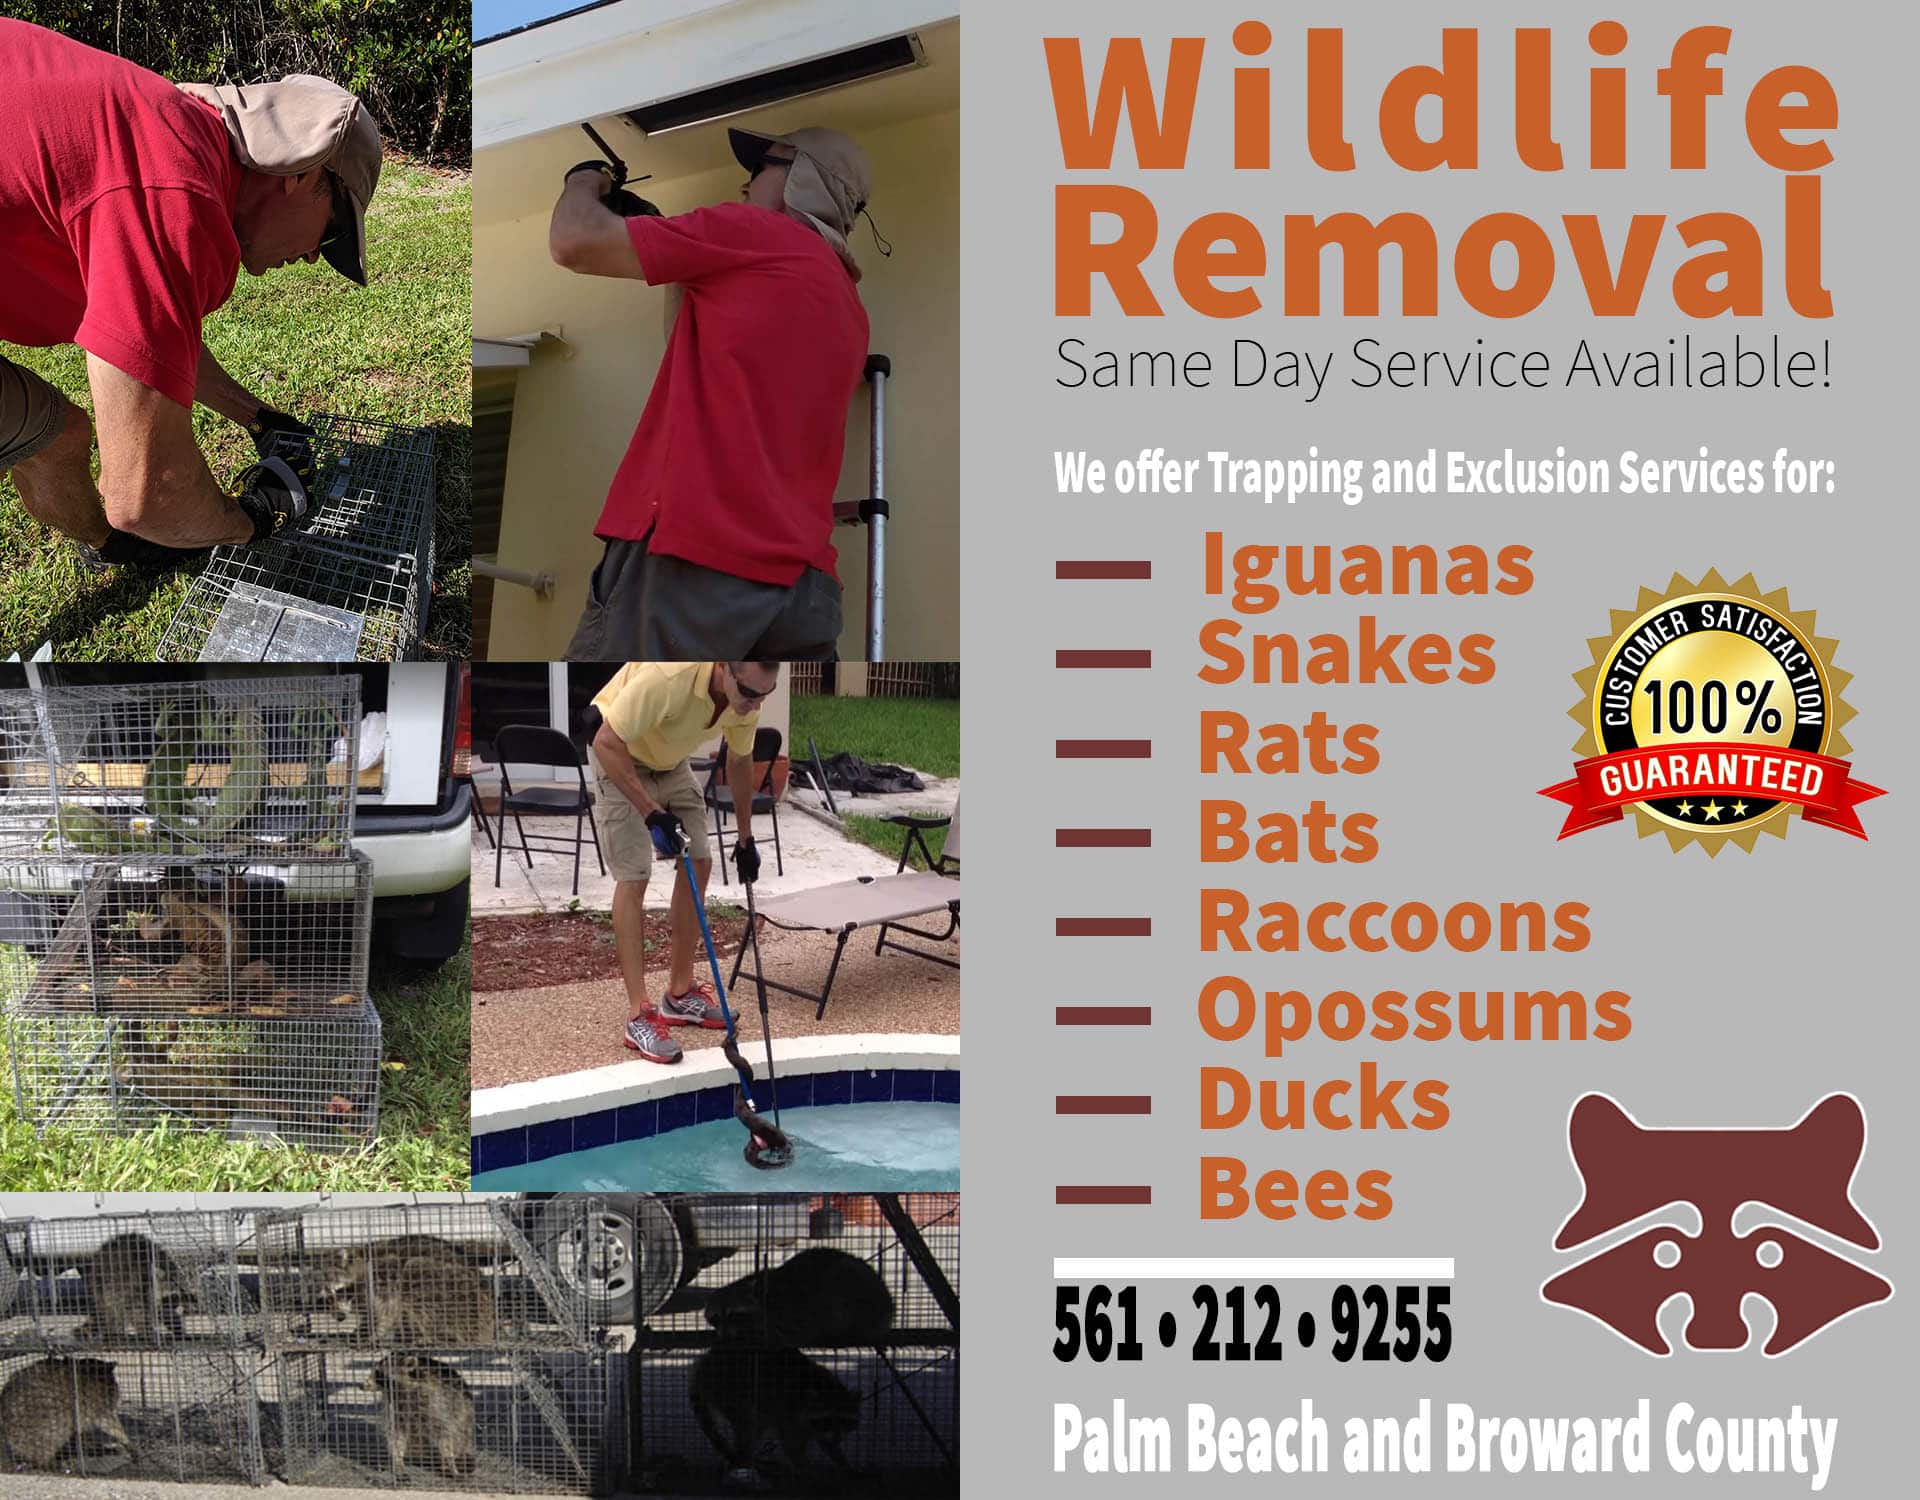 Contact the Best Wildlife Removal, Animal Control and Pest Control Service near me (24/7 ...